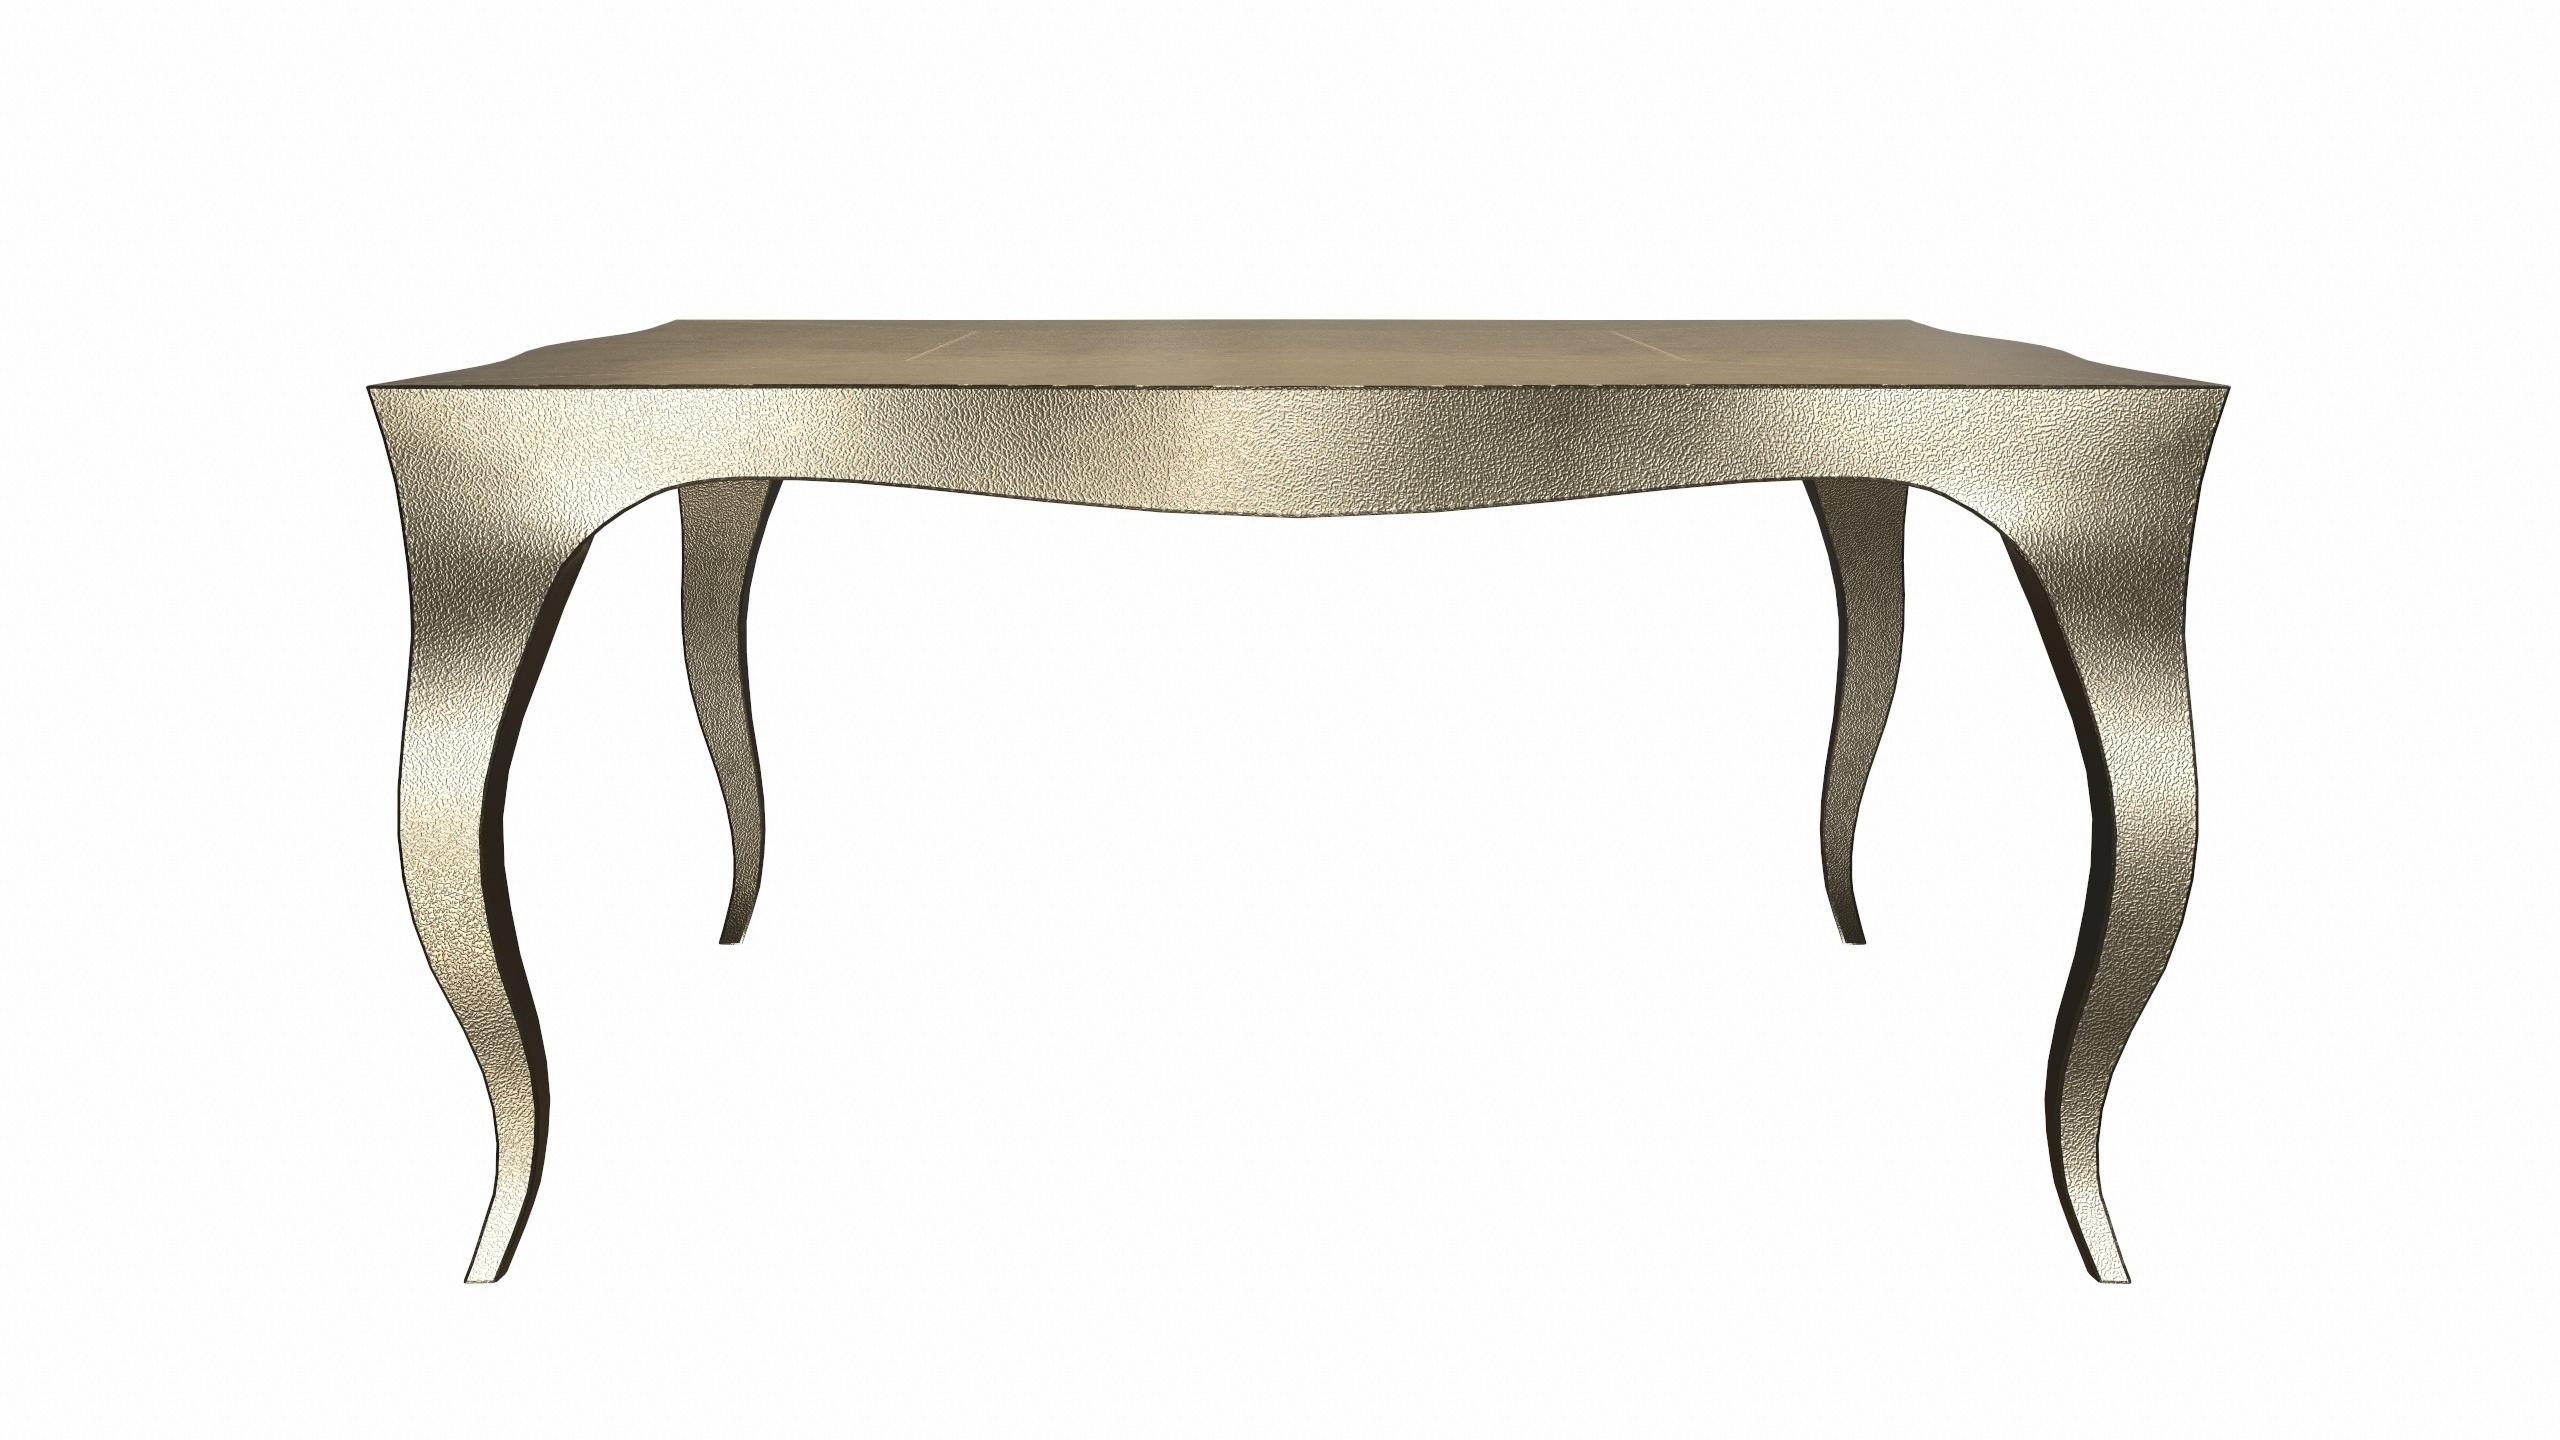 American Louise Art Deco Center Tables Fine Hammered Brass by Paul Mathieu For Sale